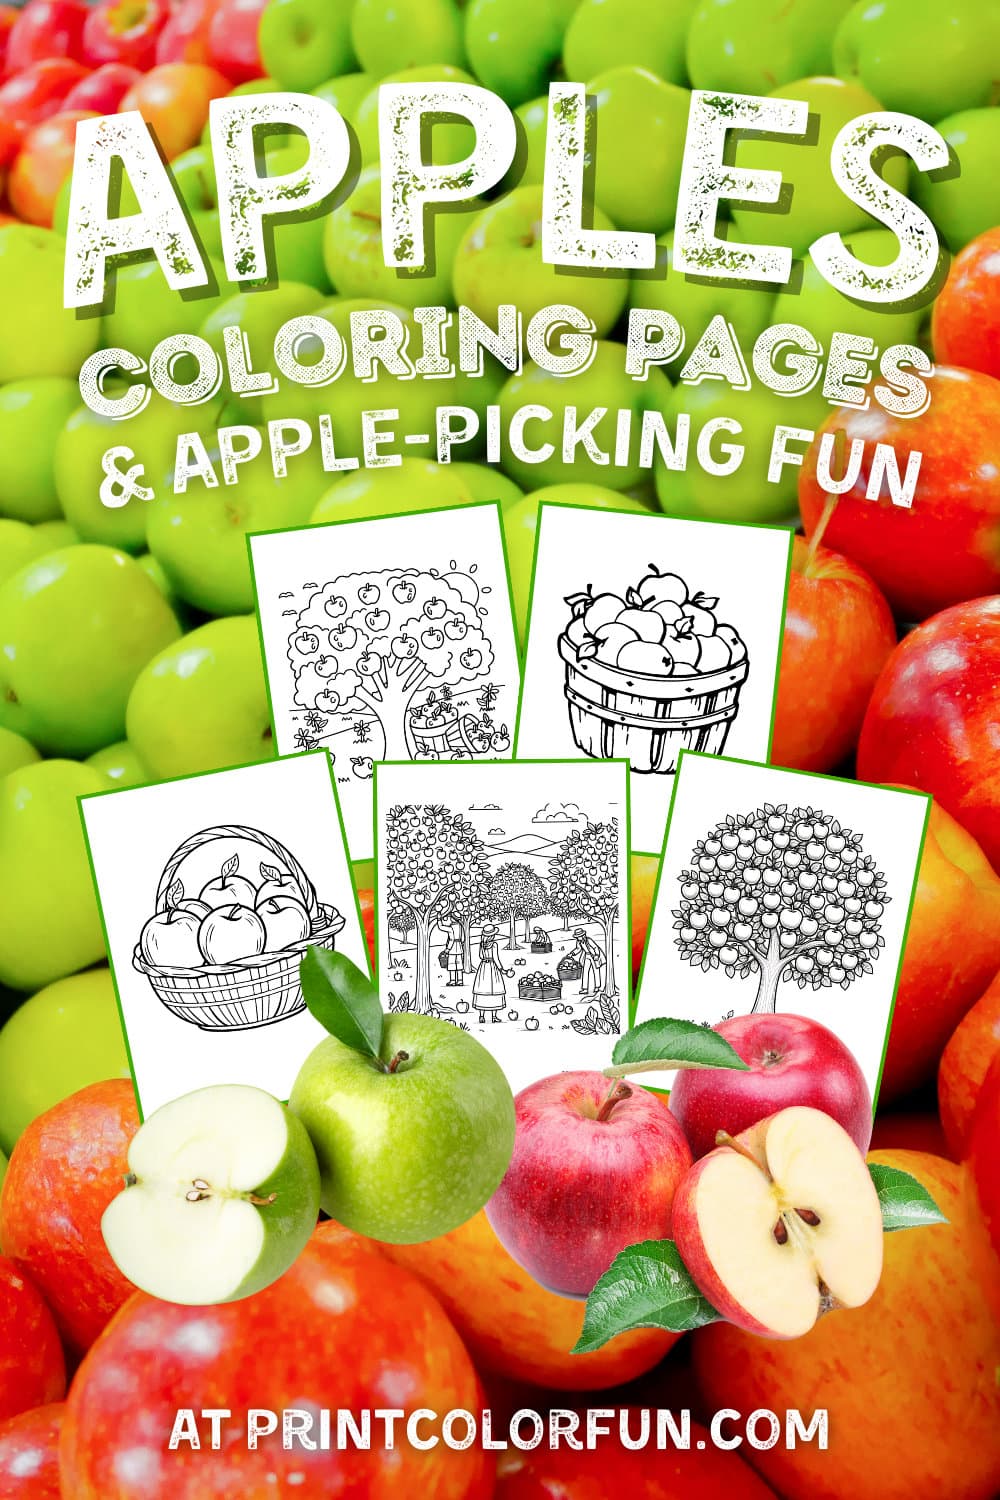 Apple clip art and coloring pages plus picking fruit at PrintColorFun com